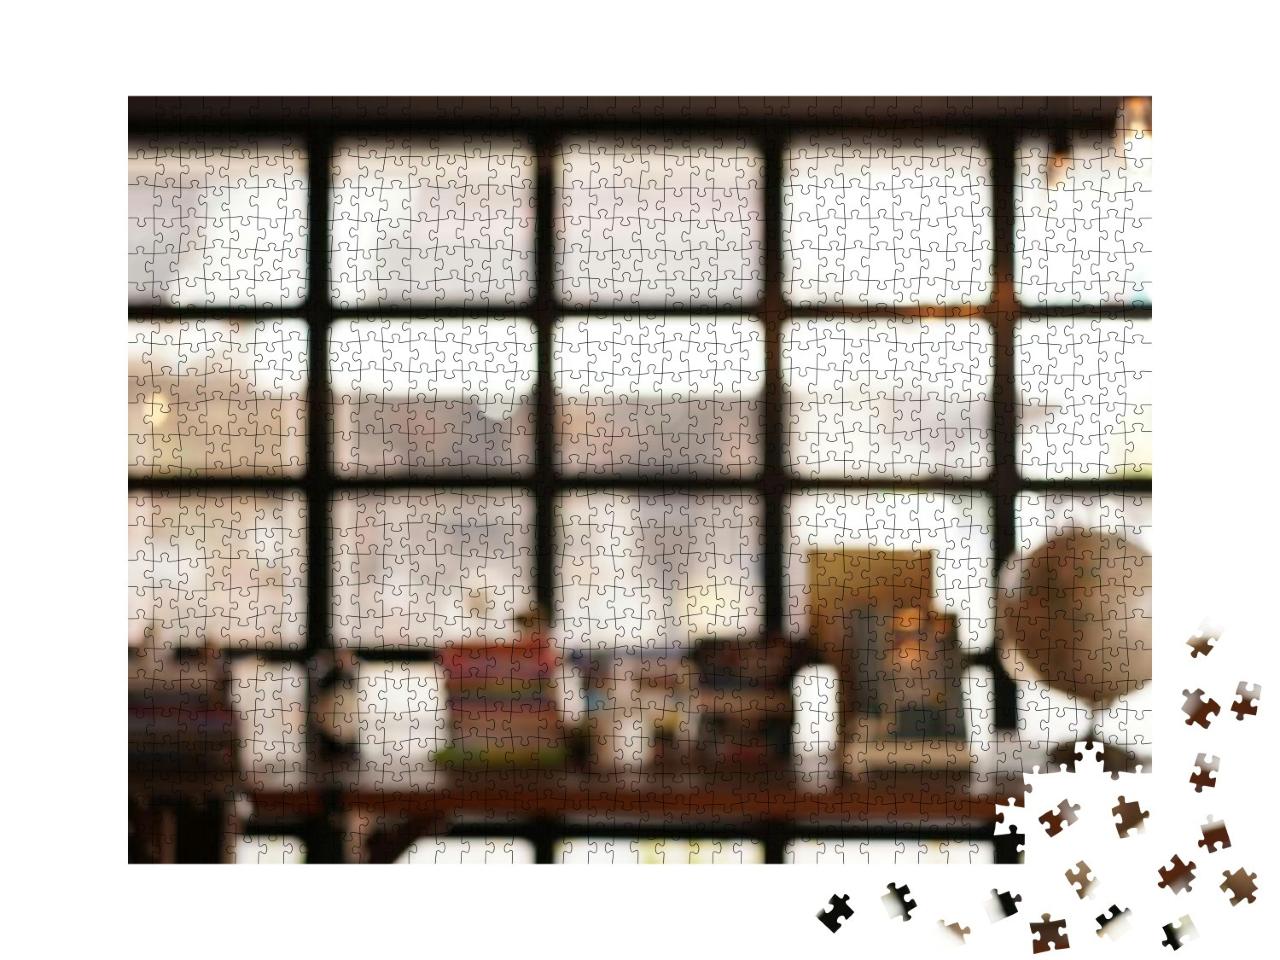 Abstract Blur Window Bokeh in Home Background for Texture... Jigsaw Puzzle with 1000 pieces